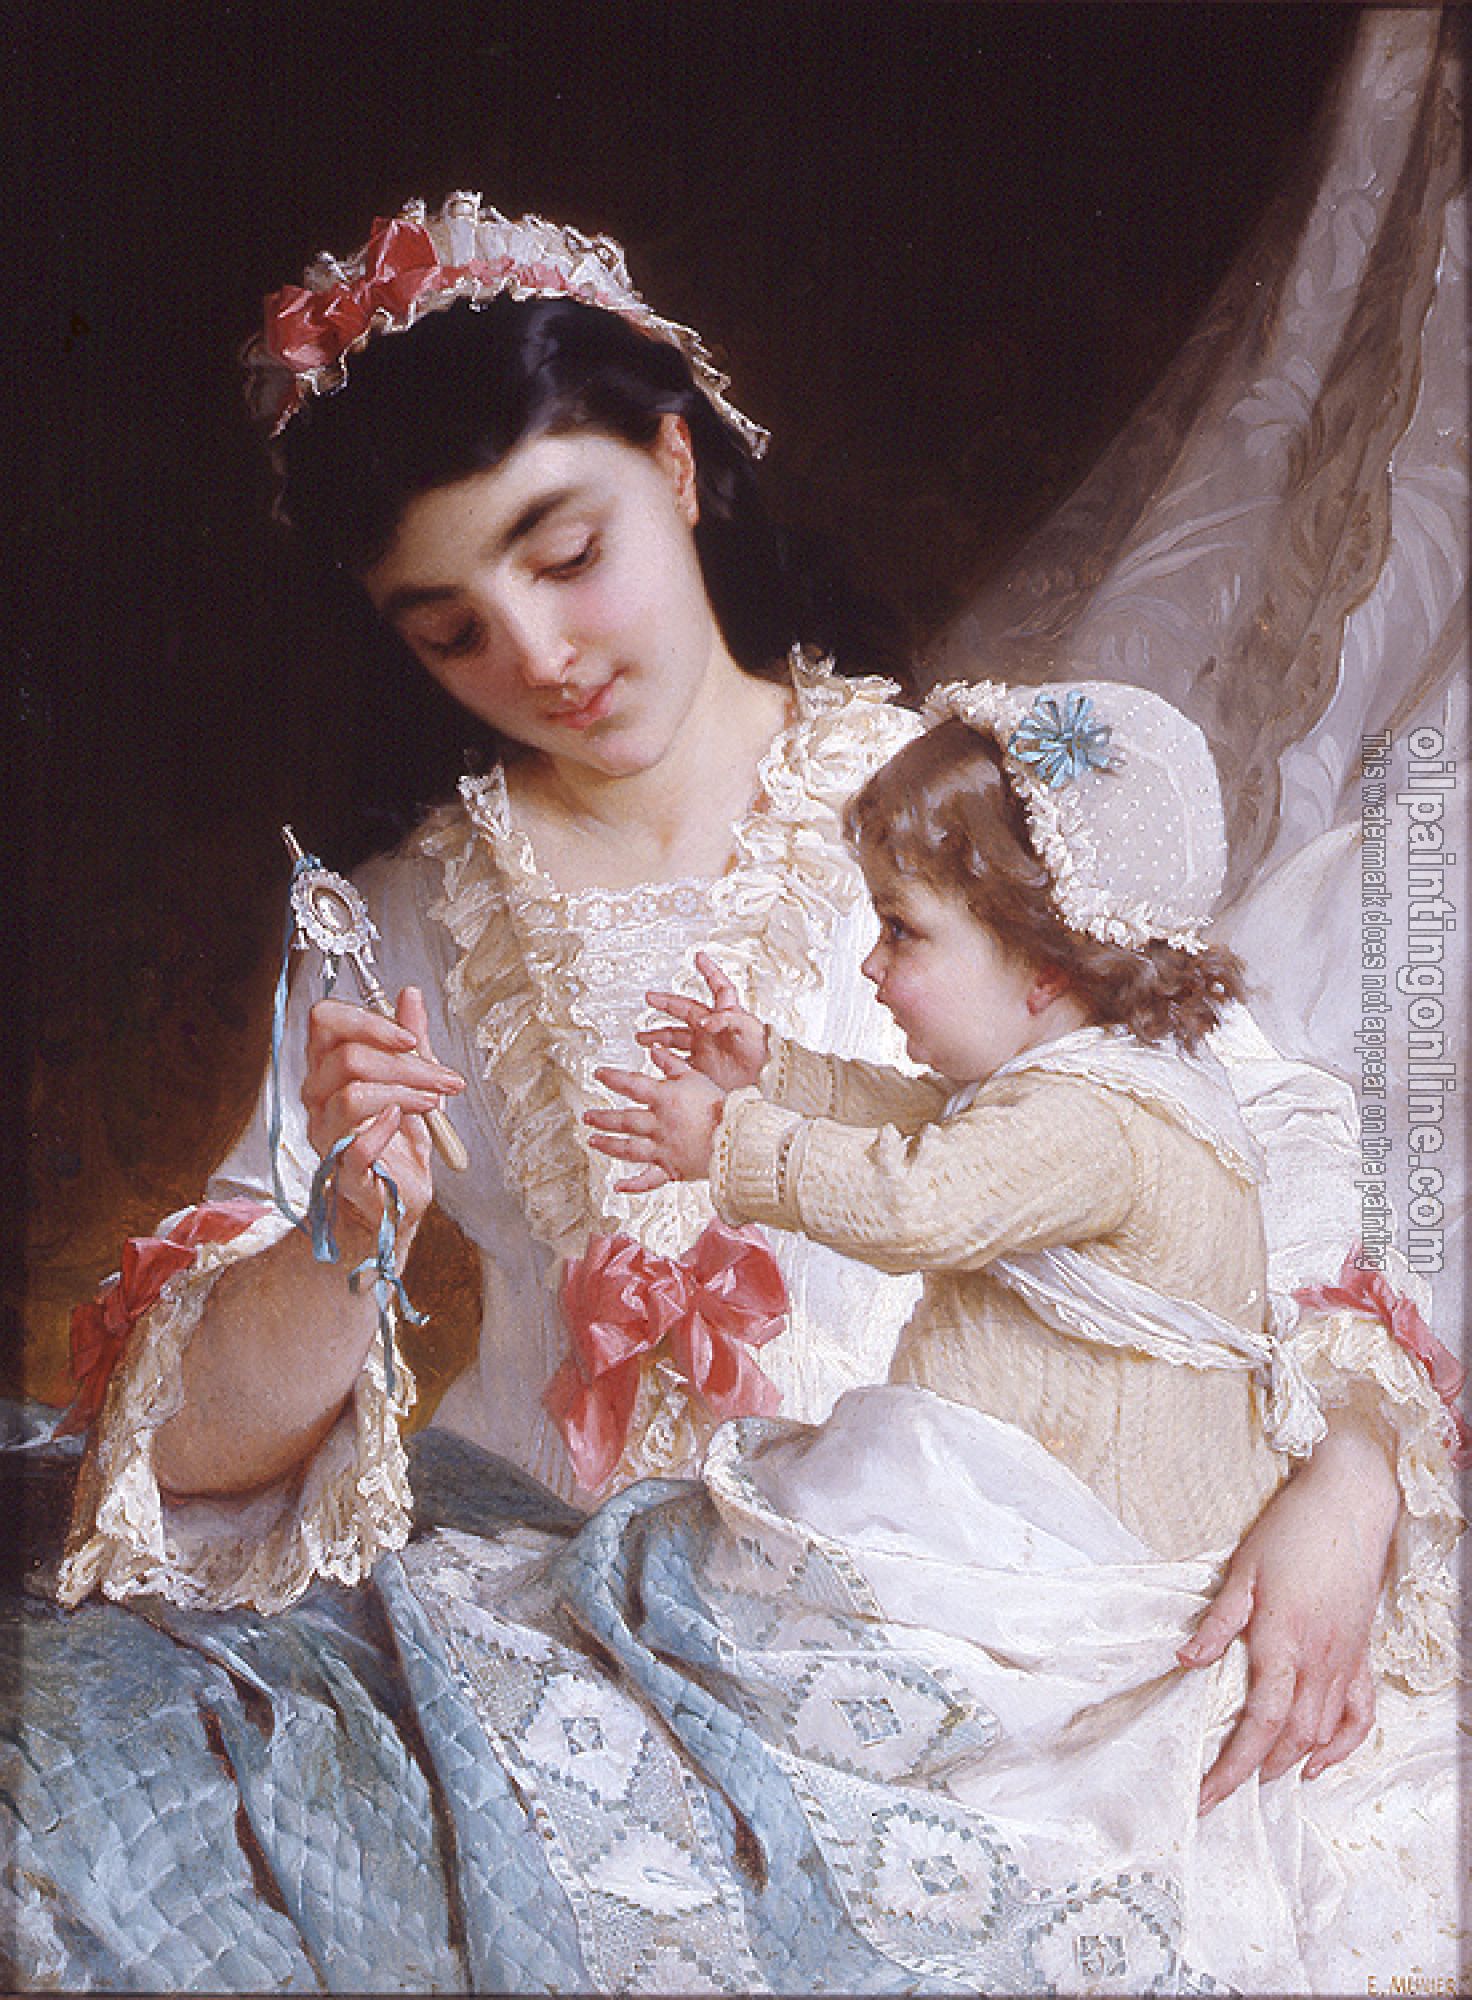 Emile Munier - distracting the baby